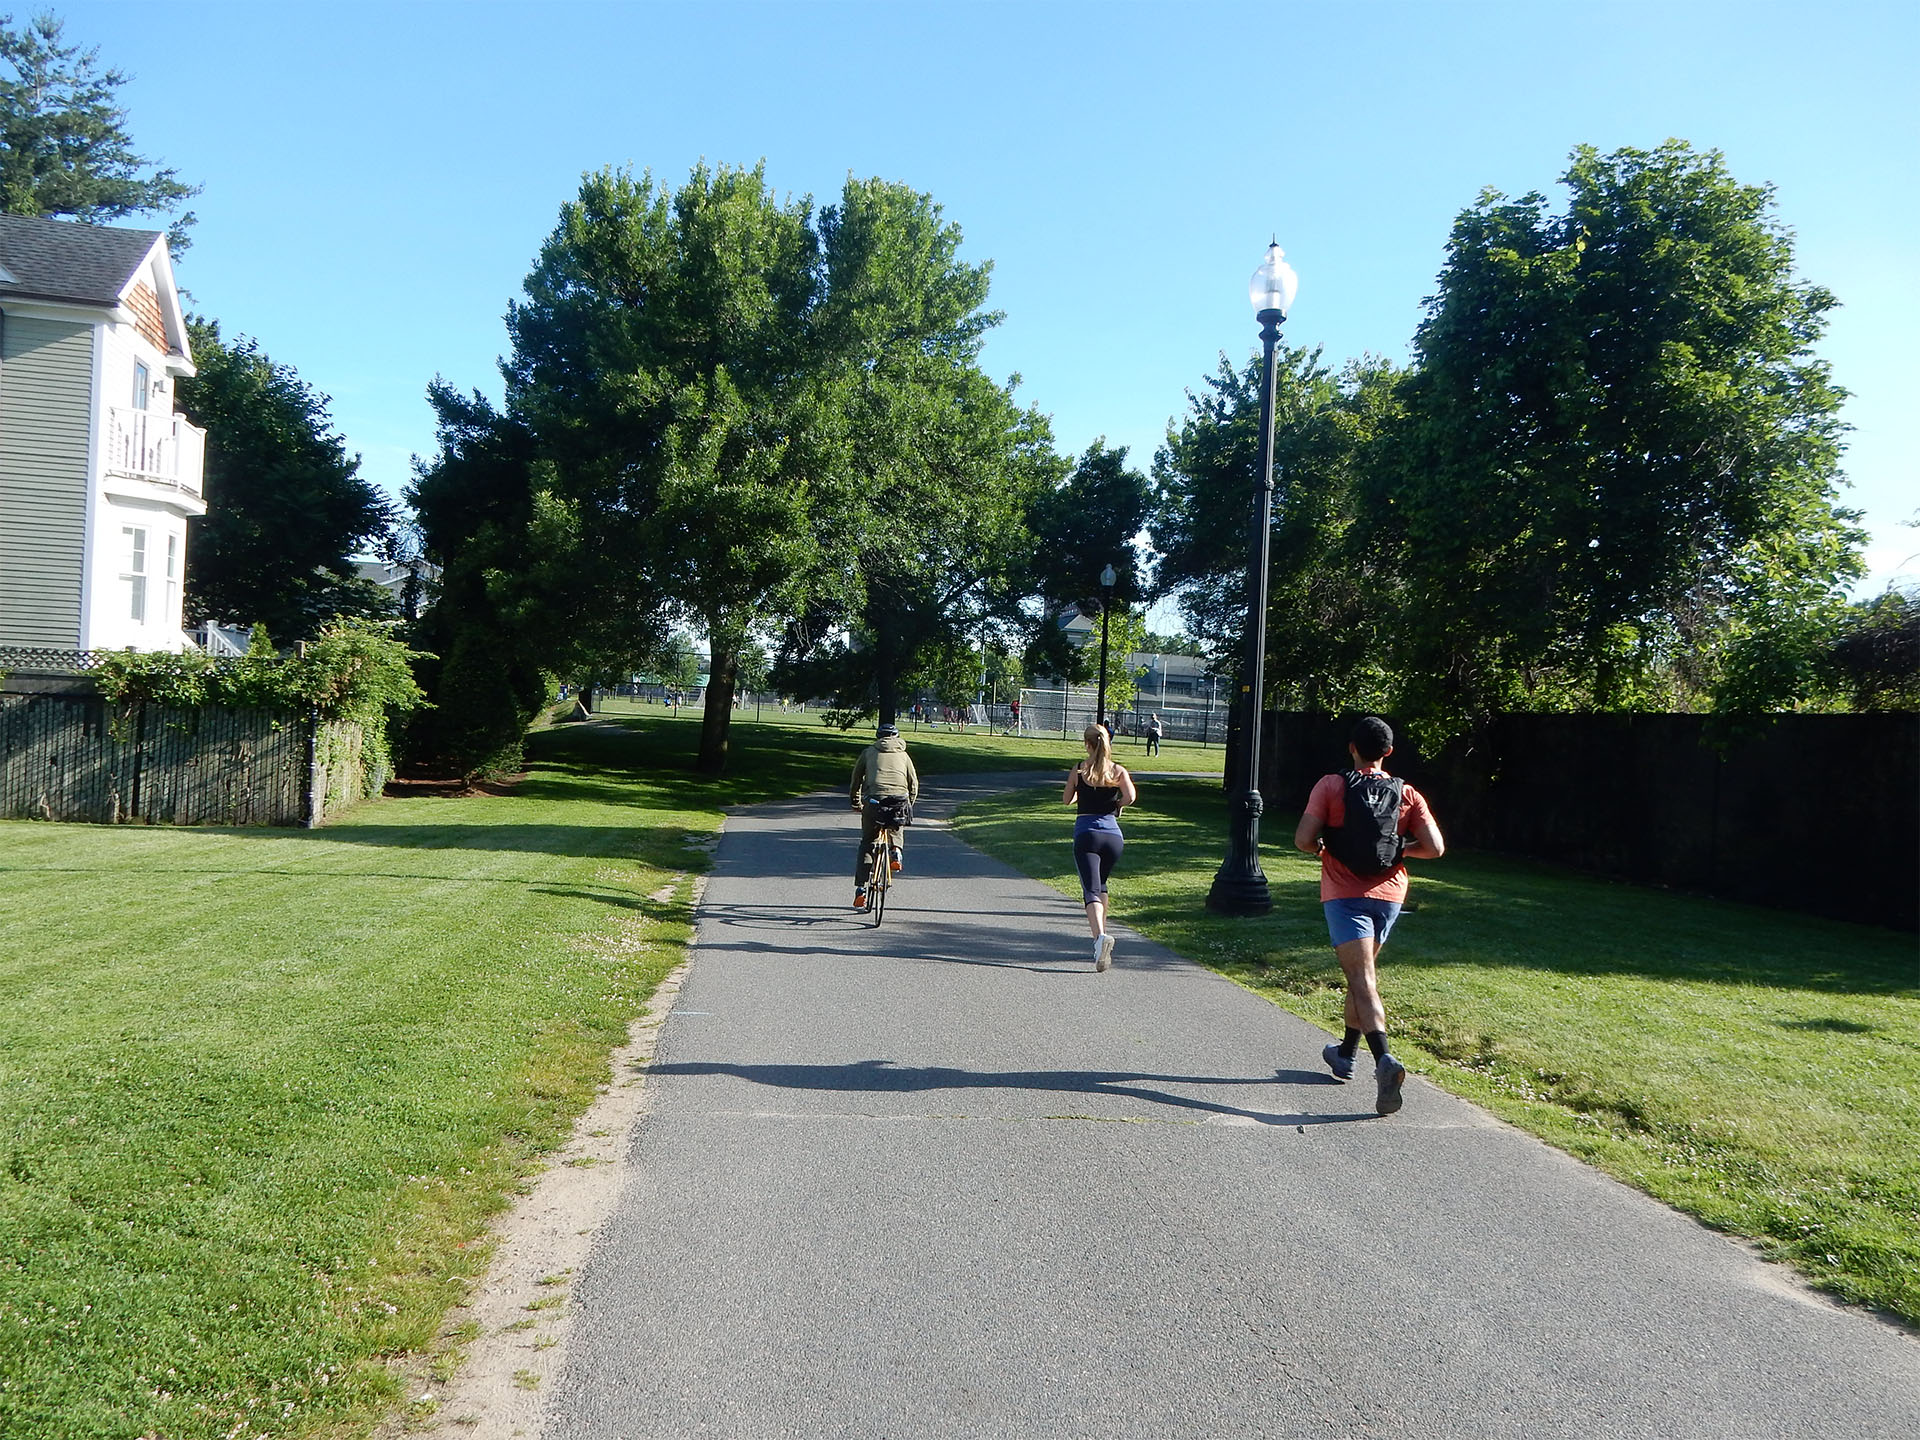 Runners and a bicyclist using Linear Park on a sunny day